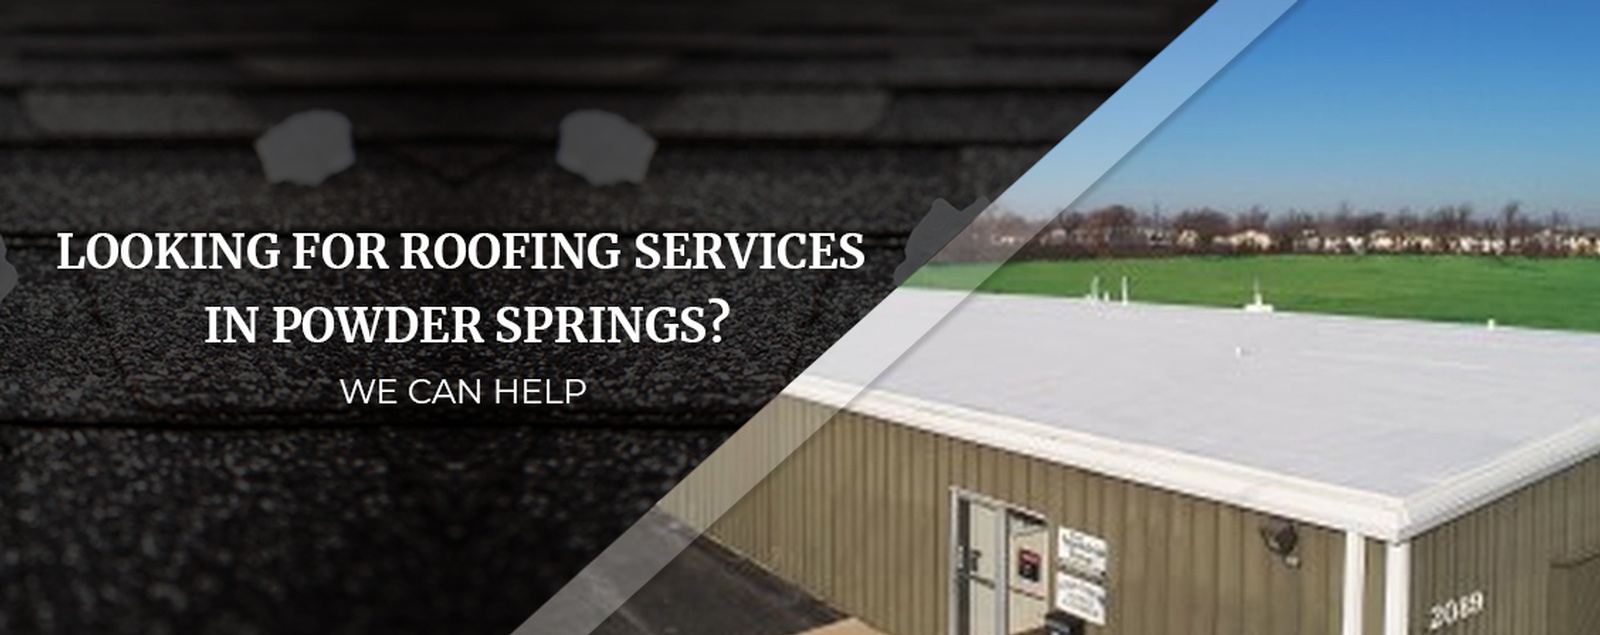 Looking For Roofing Services In Powder Springs We Can Help